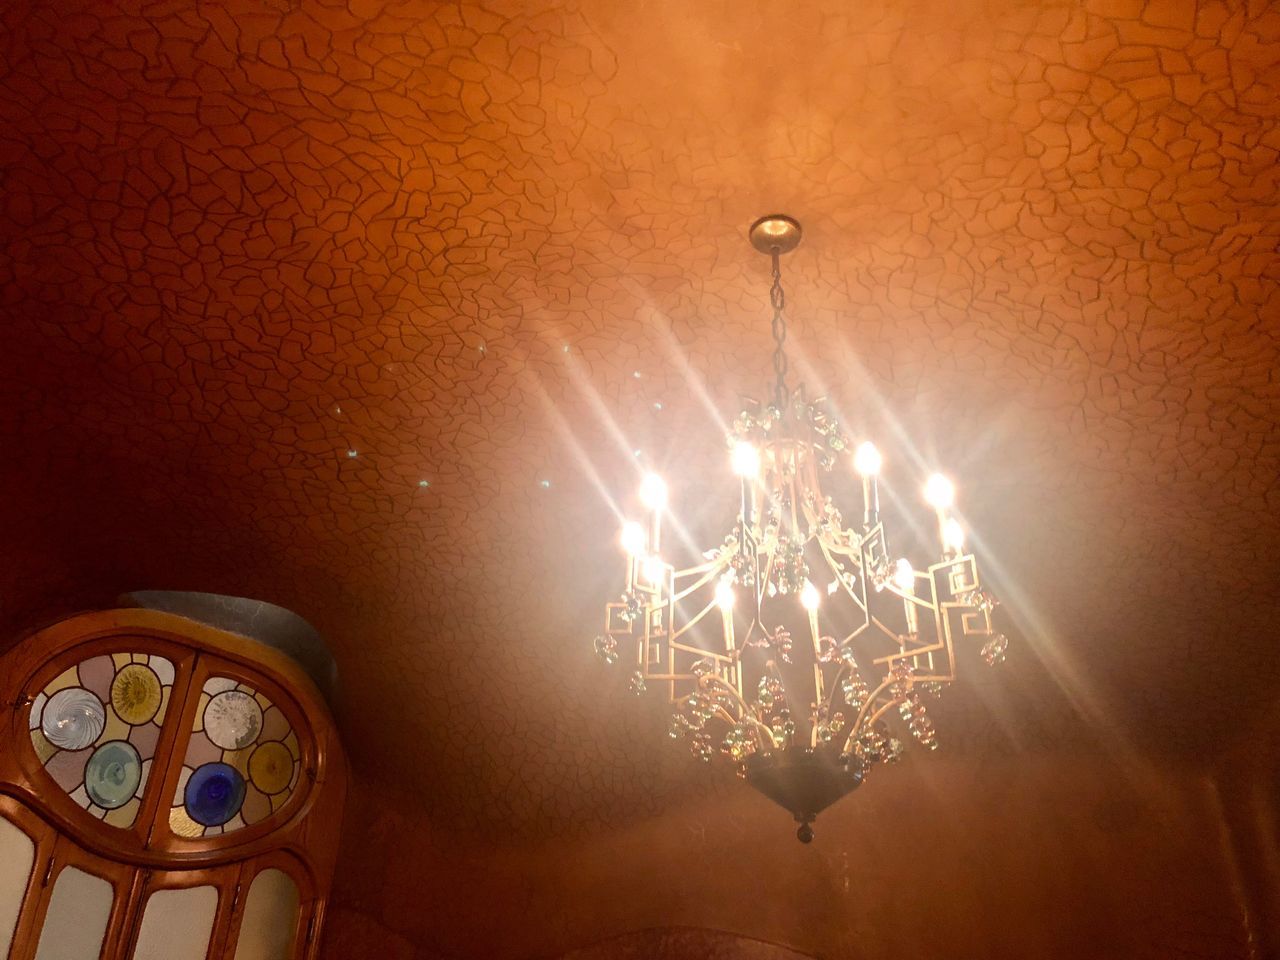 illuminated, lighting equipment, indoors, light, no people, electricity, electric light, chandelier, technology, hanging, light bulb, light - natural phenomenon, low angle view, ceiling, electric lamp, glowing, decoration, pendant light, close-up, wall - building feature, luxury, light fixture, ornate, electrical equipment